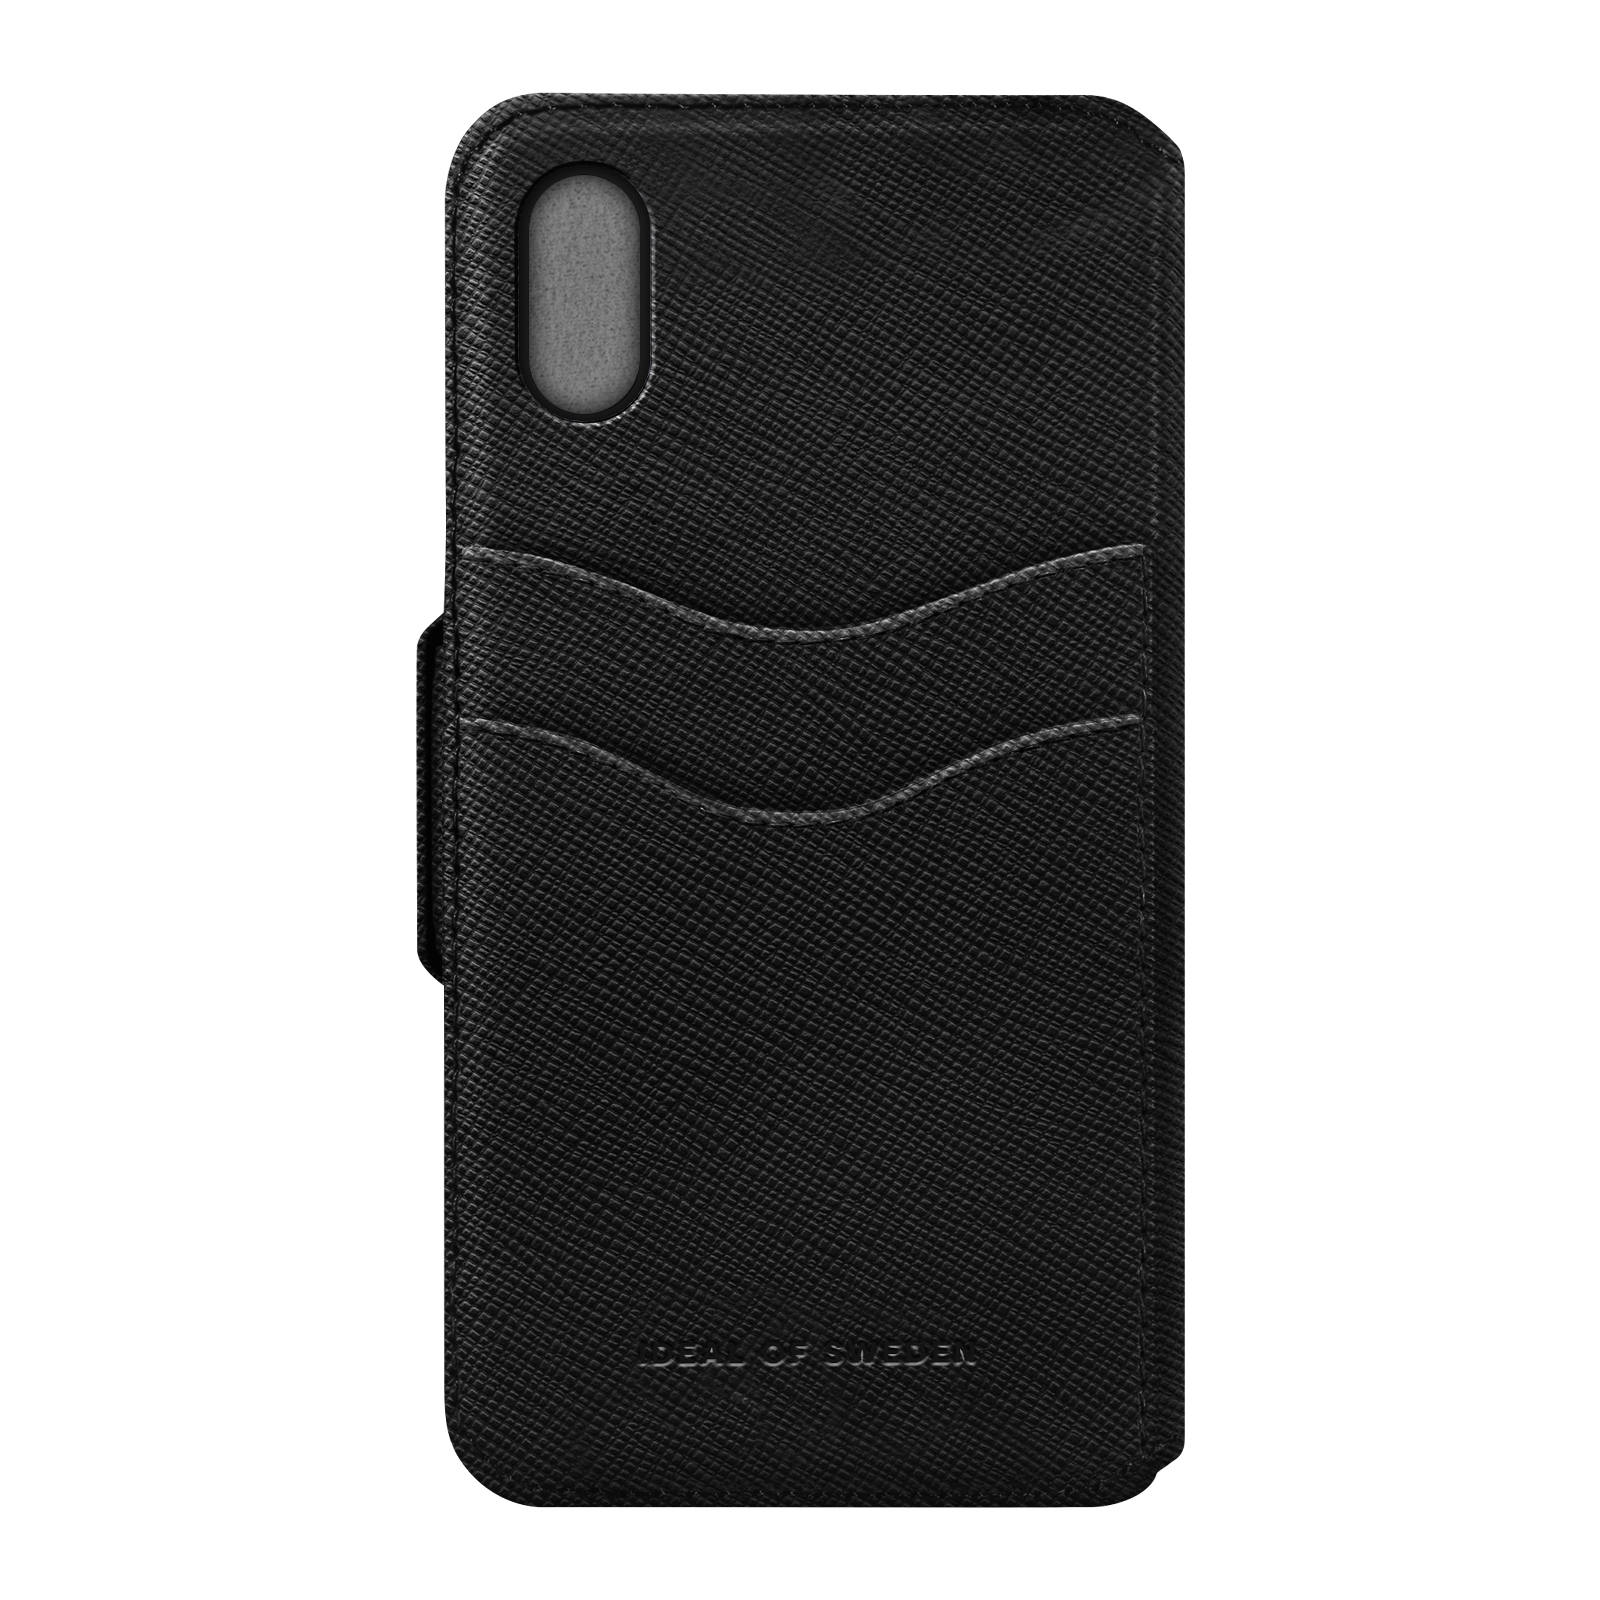 iPhone OF iPhone X, XS, Full IDEAL SWEDEN Cover, Apple, IDFW-I8-01, Black